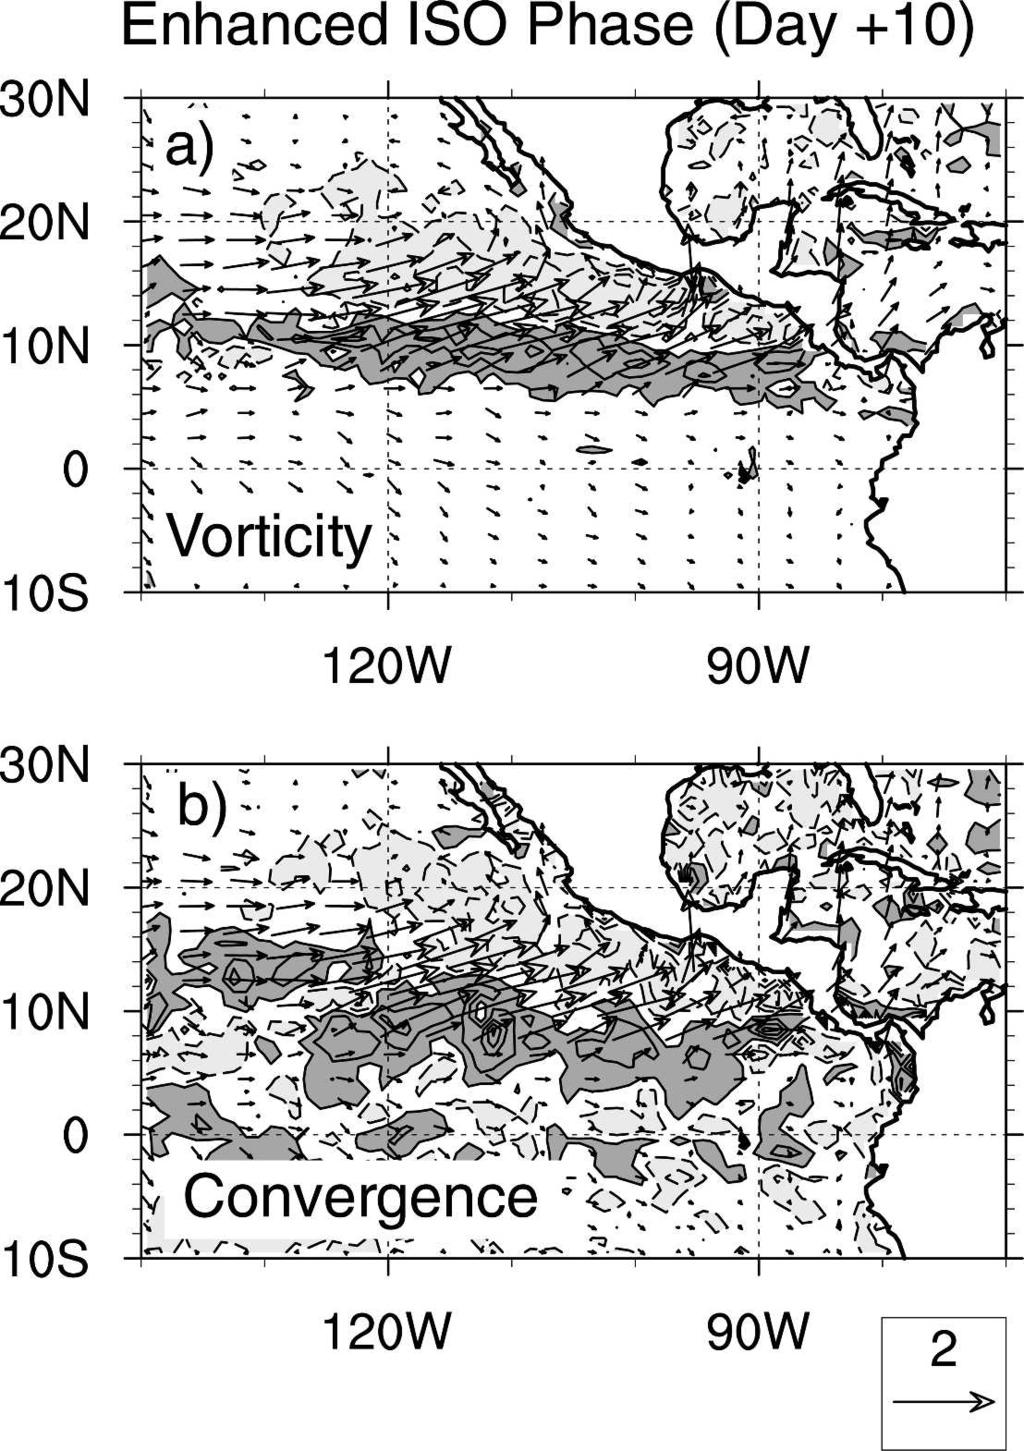 JANUARY 2007 M A L O N E Y A N D E S B E N S E N 15 FIG. 10. Intraseasonal (a) vorticity and (b) convergence anomalies regressed against the ISO index of ME03 at a lag of 10 days.